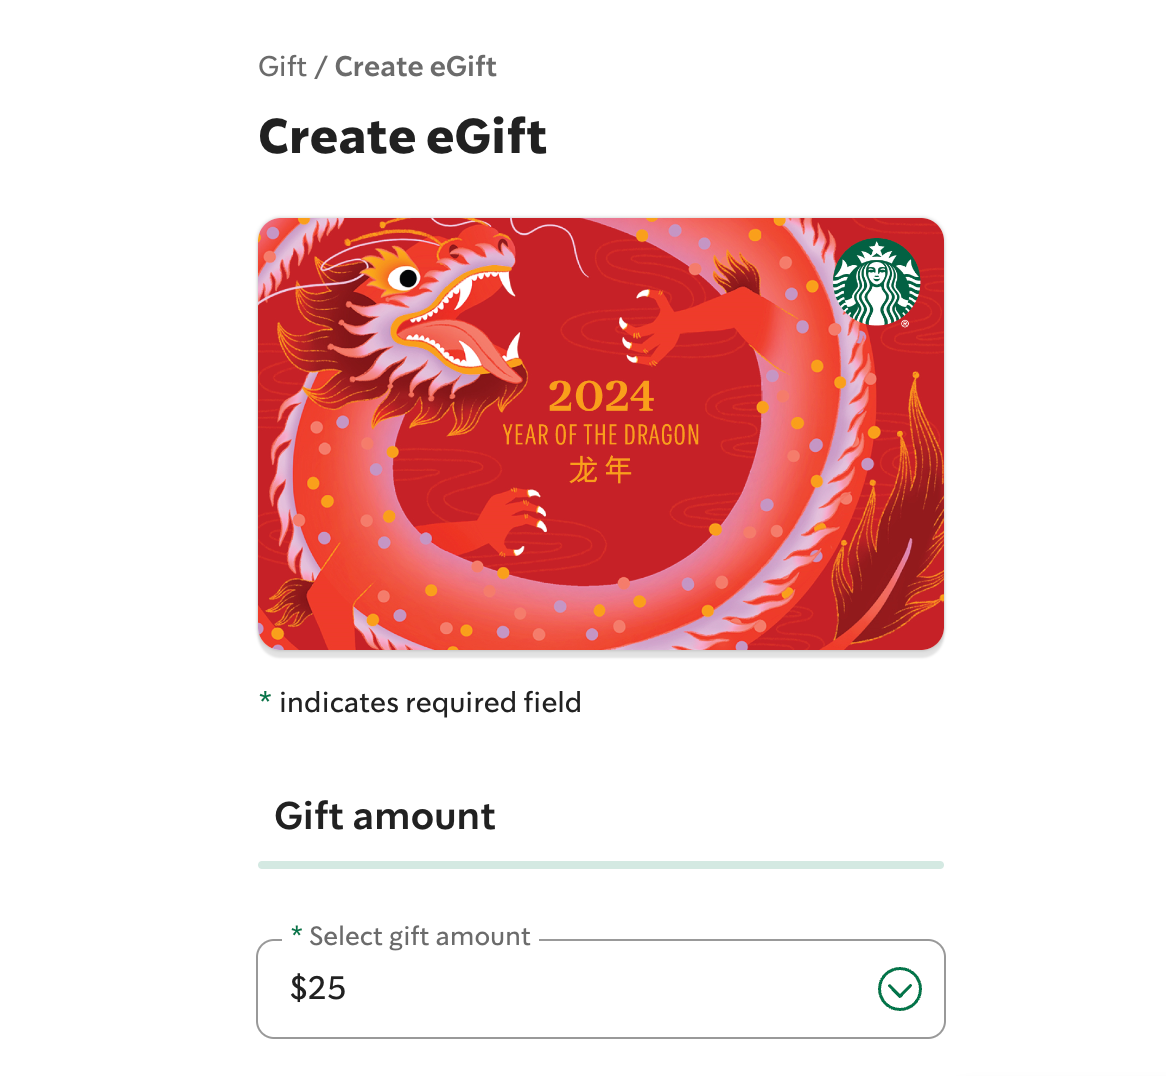 Starbucks’ gift card for the Lunar New Year featuring a dragon.